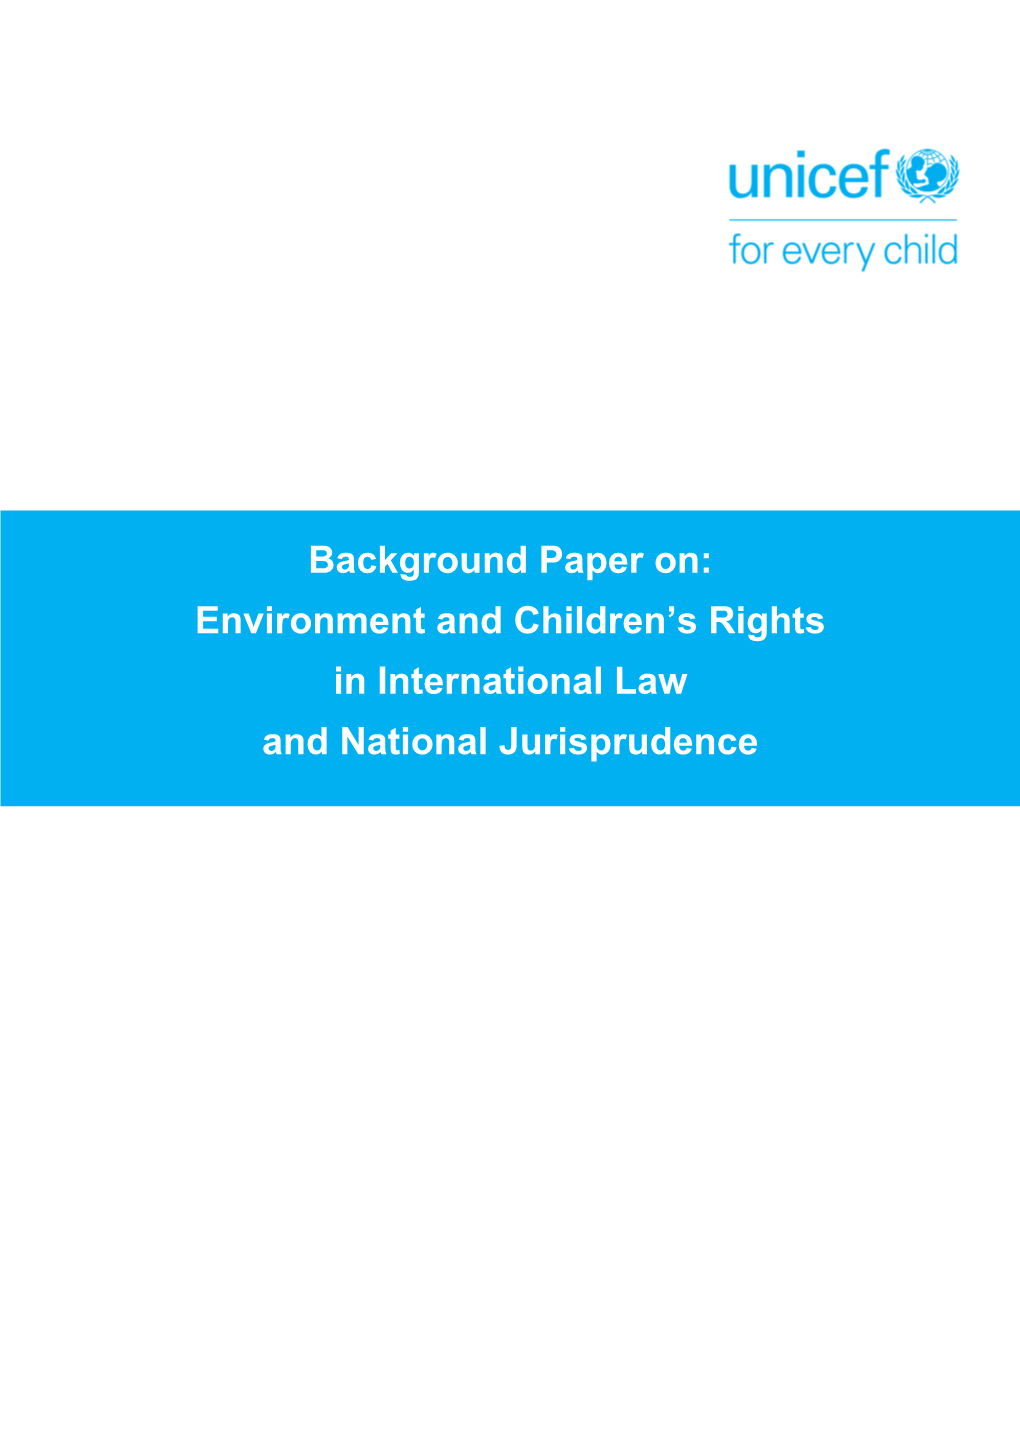 Environment and Children's Rights in International Law and National Jurisprudence